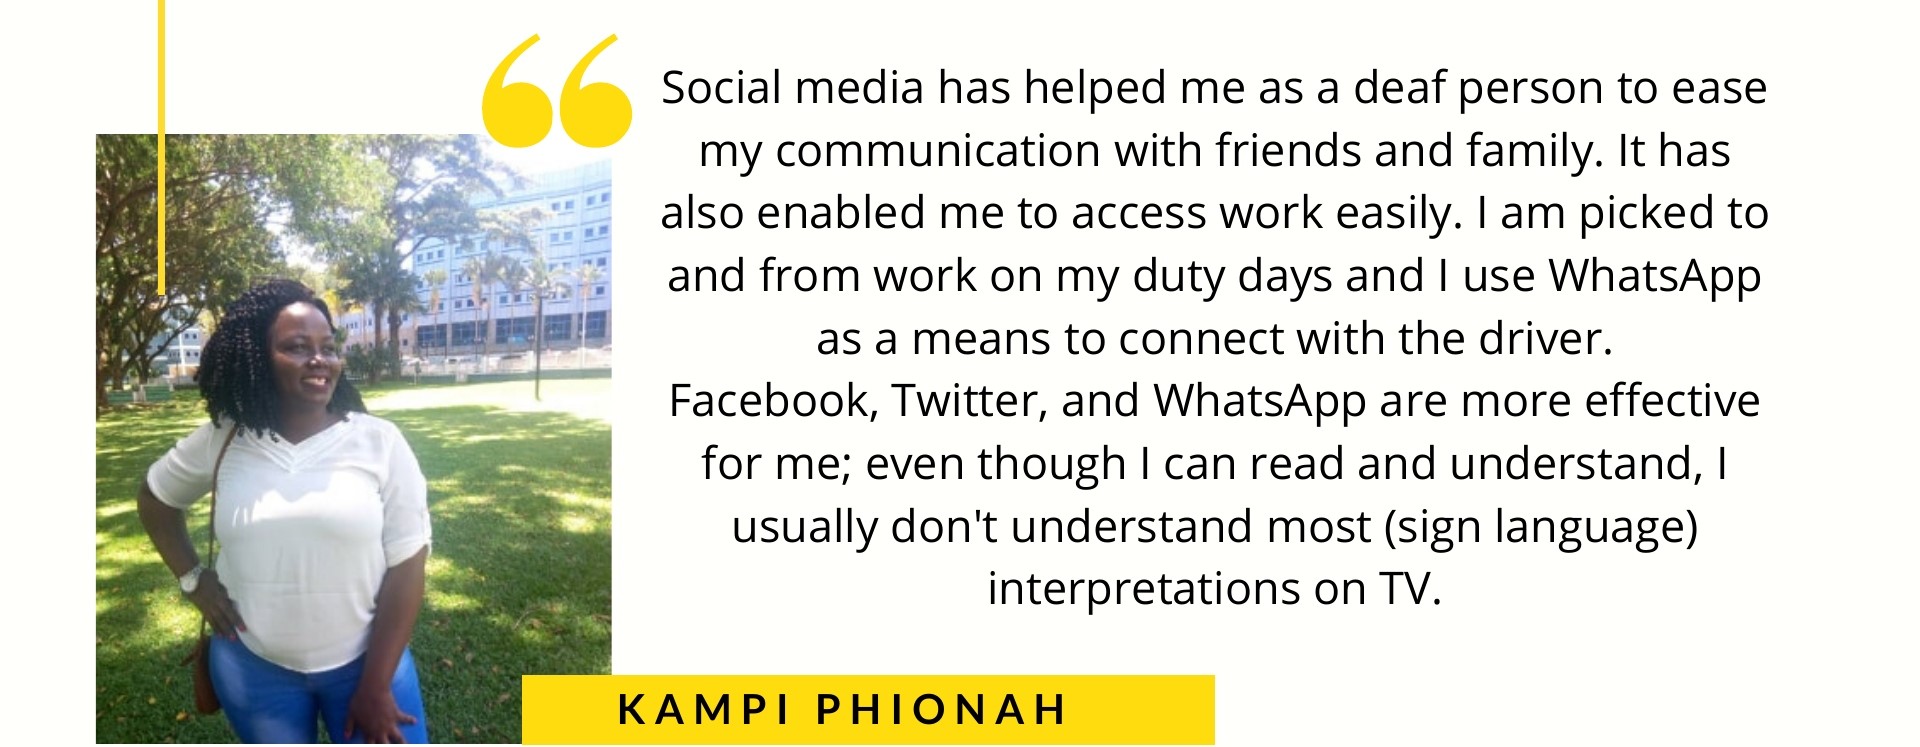 Kampi Phionah says Social media has helped me as a deaf person to ease my communication with friends and family. It has also enabled me to access work easily. I am picked to and from work on my duty days and I use WhatsApp as a means to connect with the driver. Facebook, Twitter, and WhatsApp are more effective for me even though I can read and understand, I usually don't understand most (sign language) interpretations on TV.